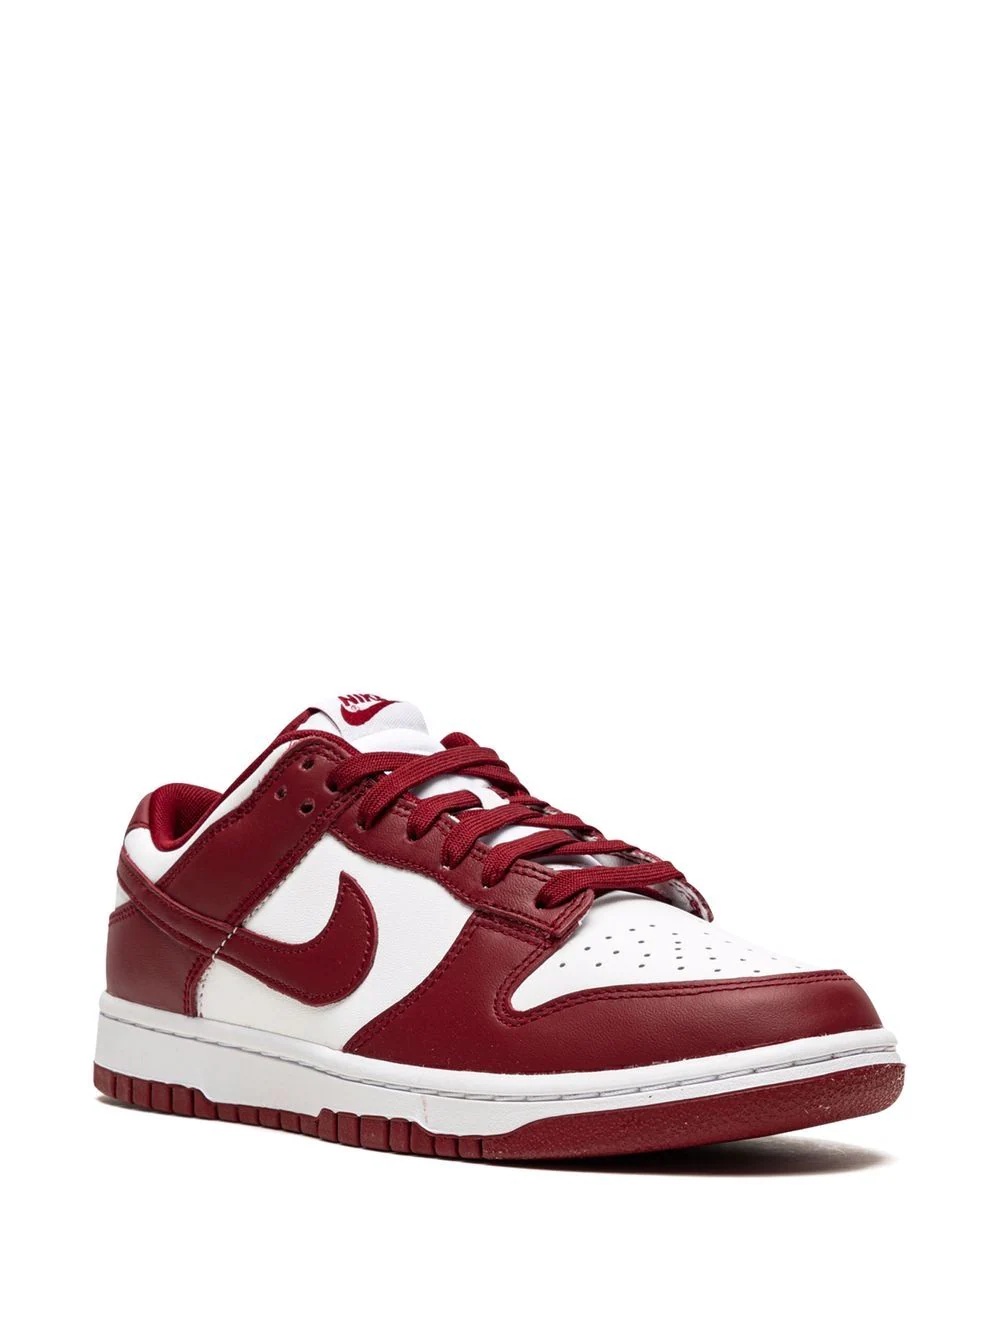 Dunk Low "Team Red" sneakers - 2